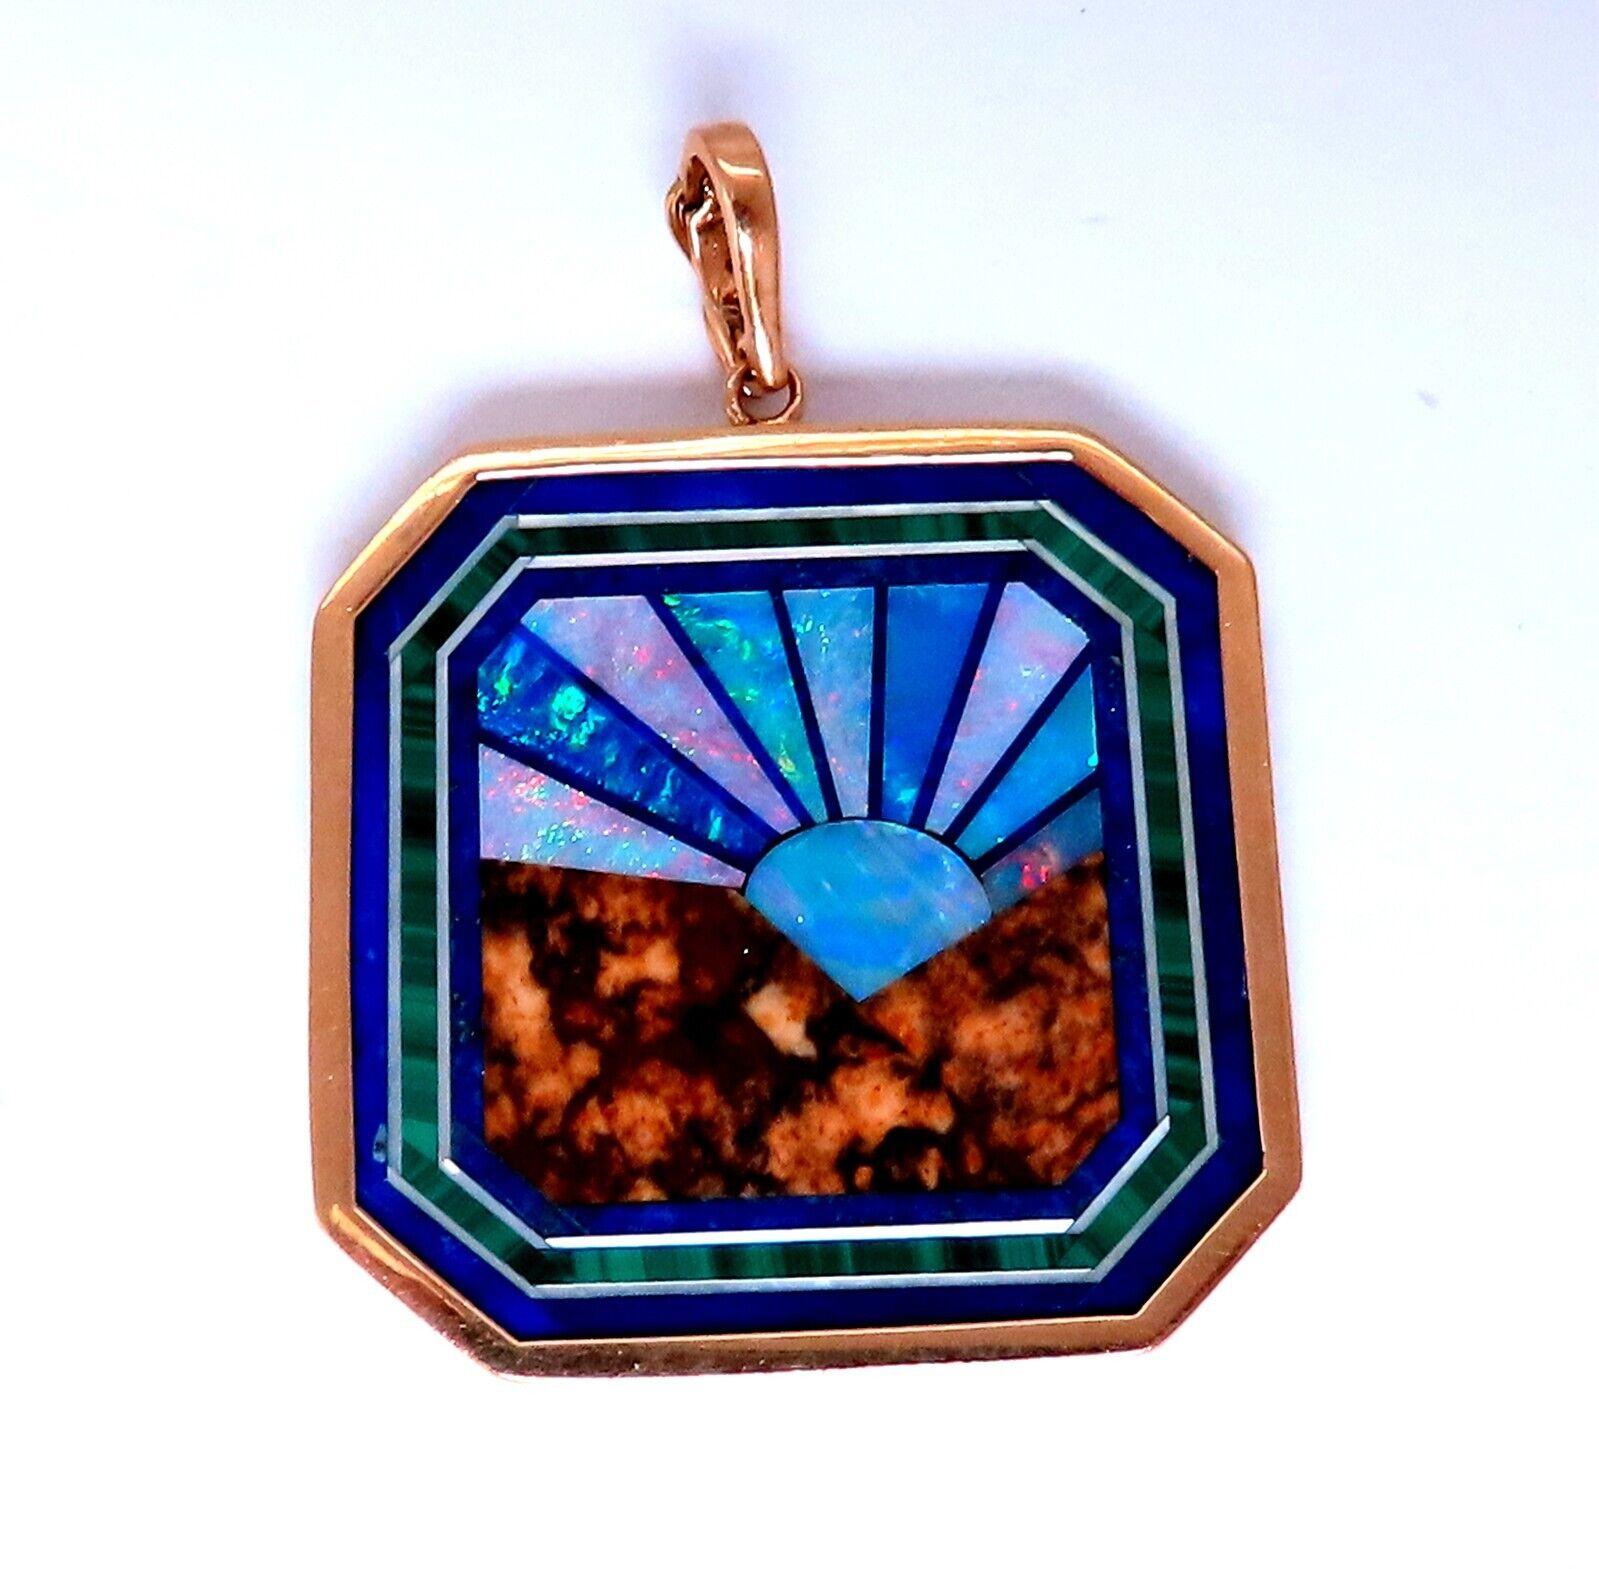 Rising Sun Pietra Dura Inlay Opal Malachite Lapis Pendant 14kt Gold In New Condition For Sale In New York, NY